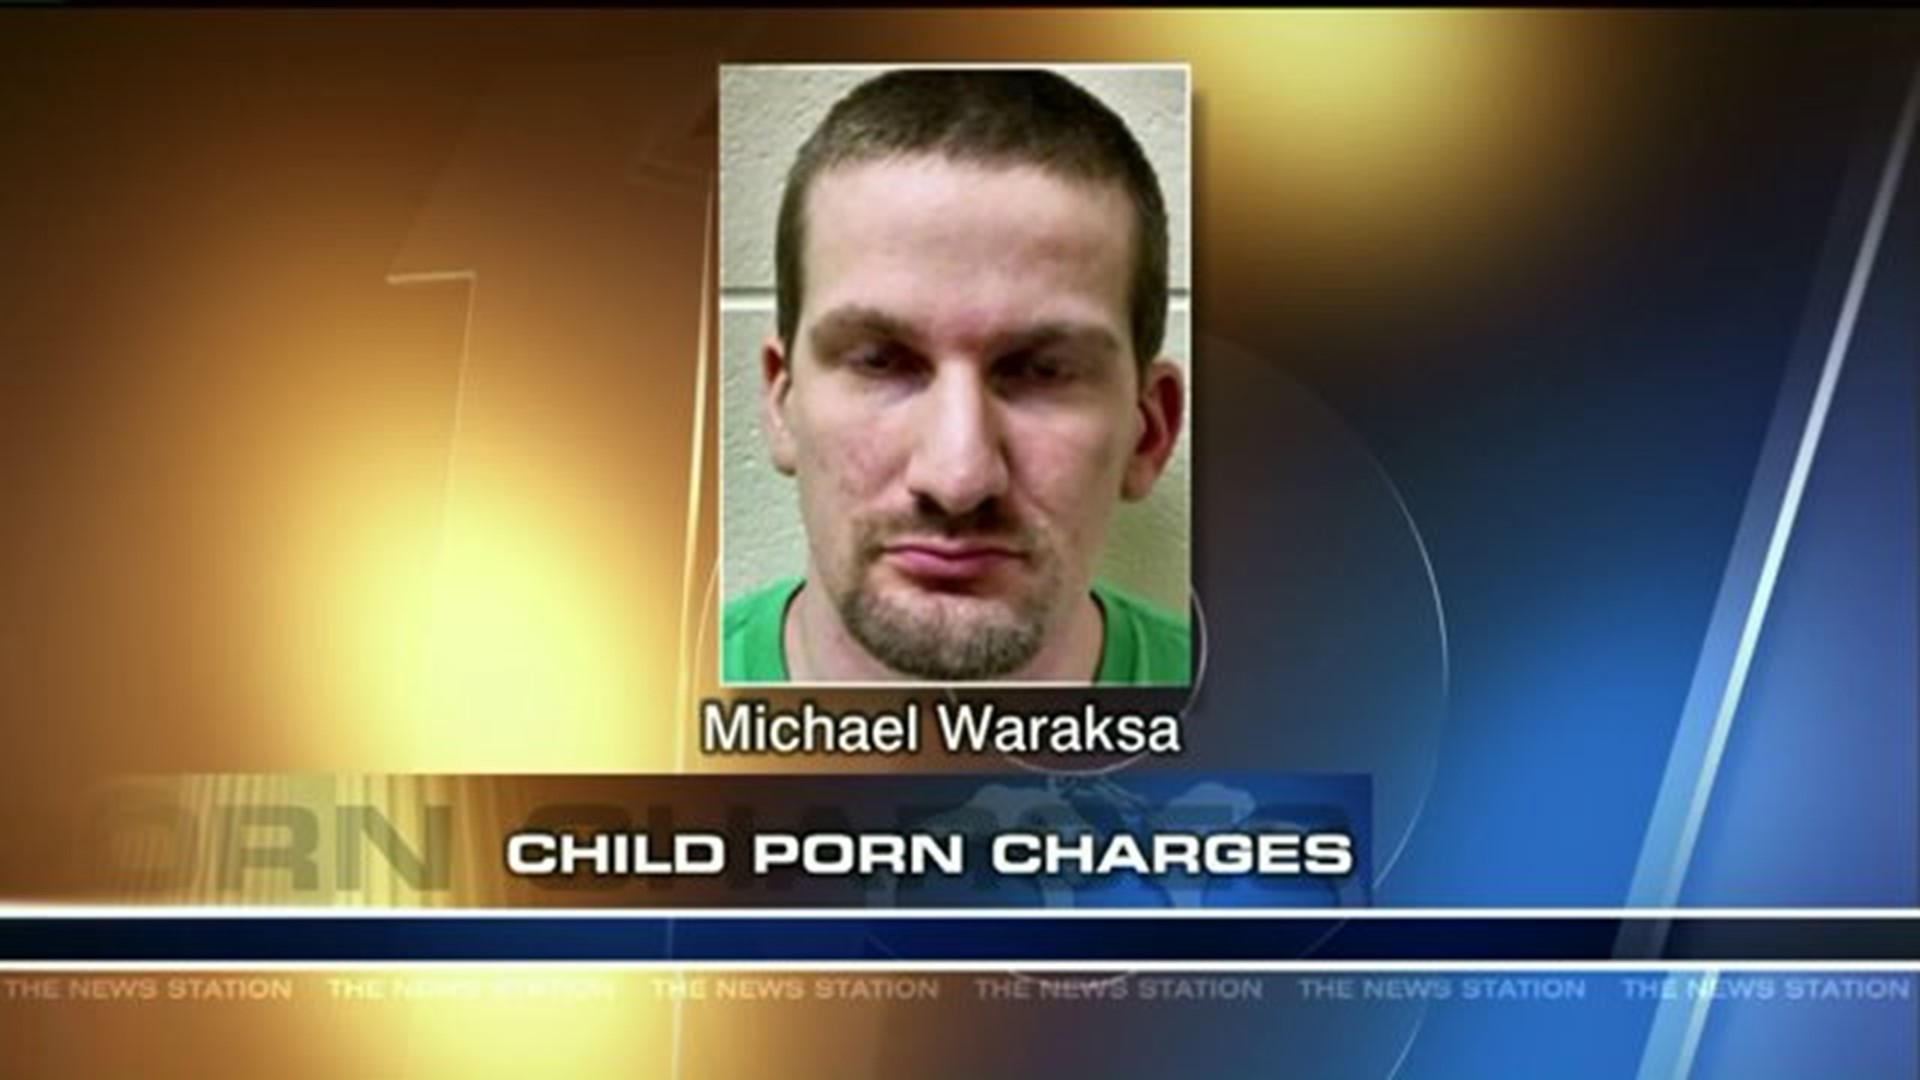 Registered Sex Offender Accused of Downloading Child Porn